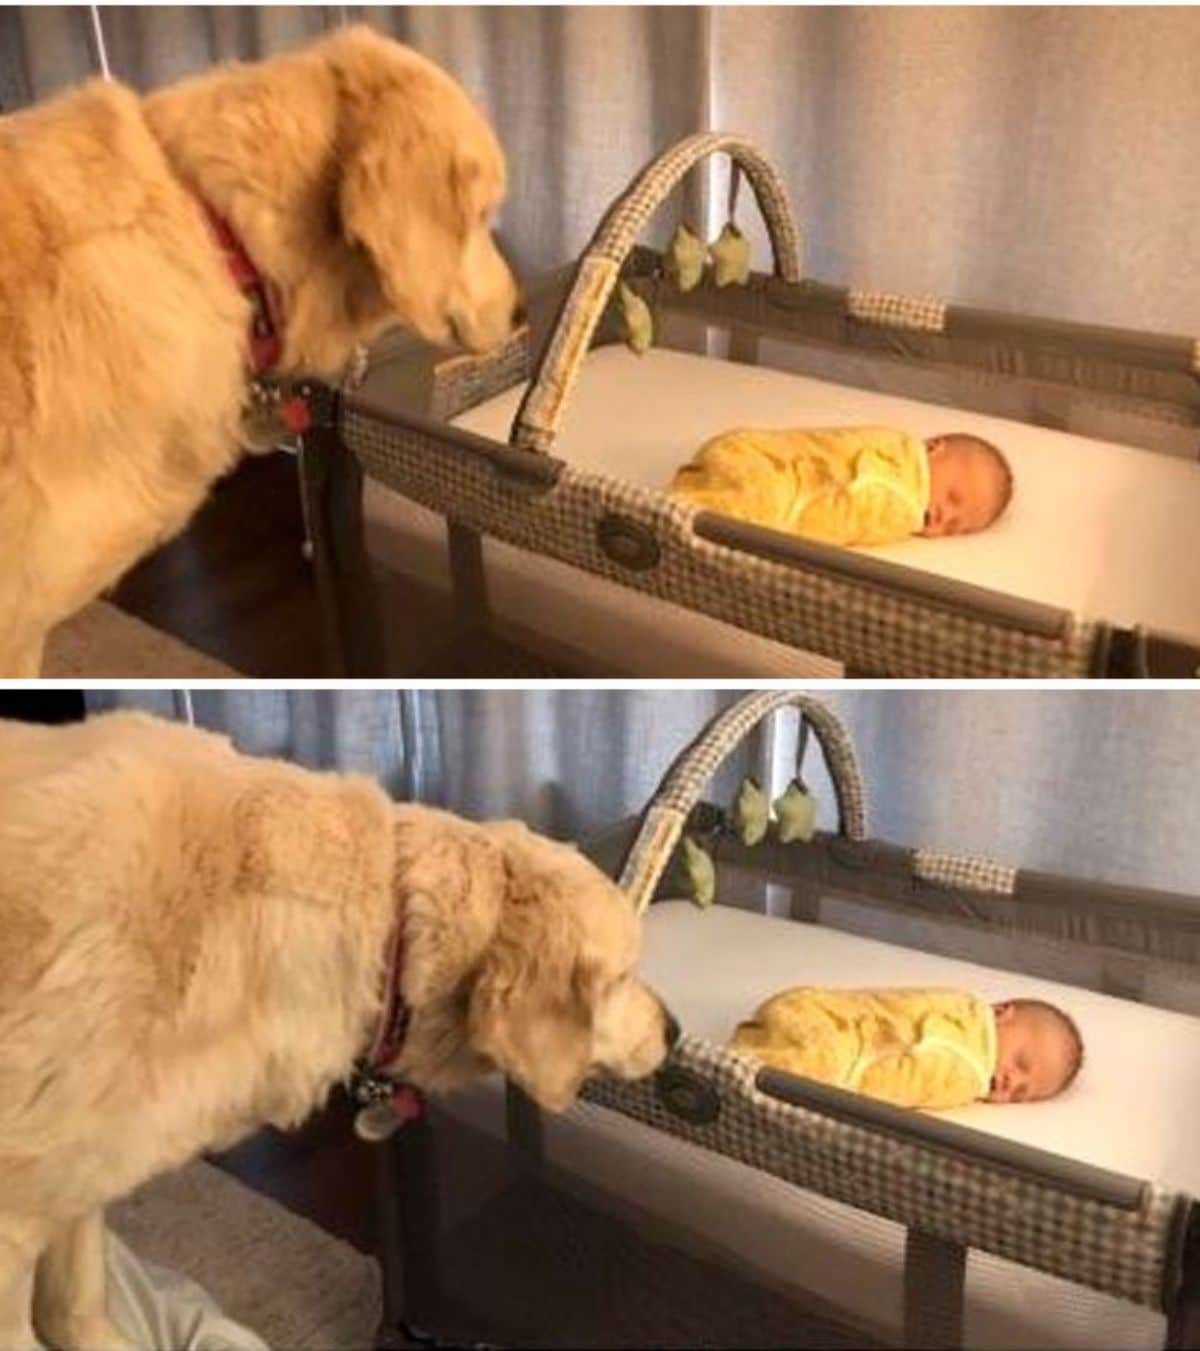 2 photos of a golden retriever looking at and sniffing a baby wrapped in a yellow blanket inside a brown and white crib